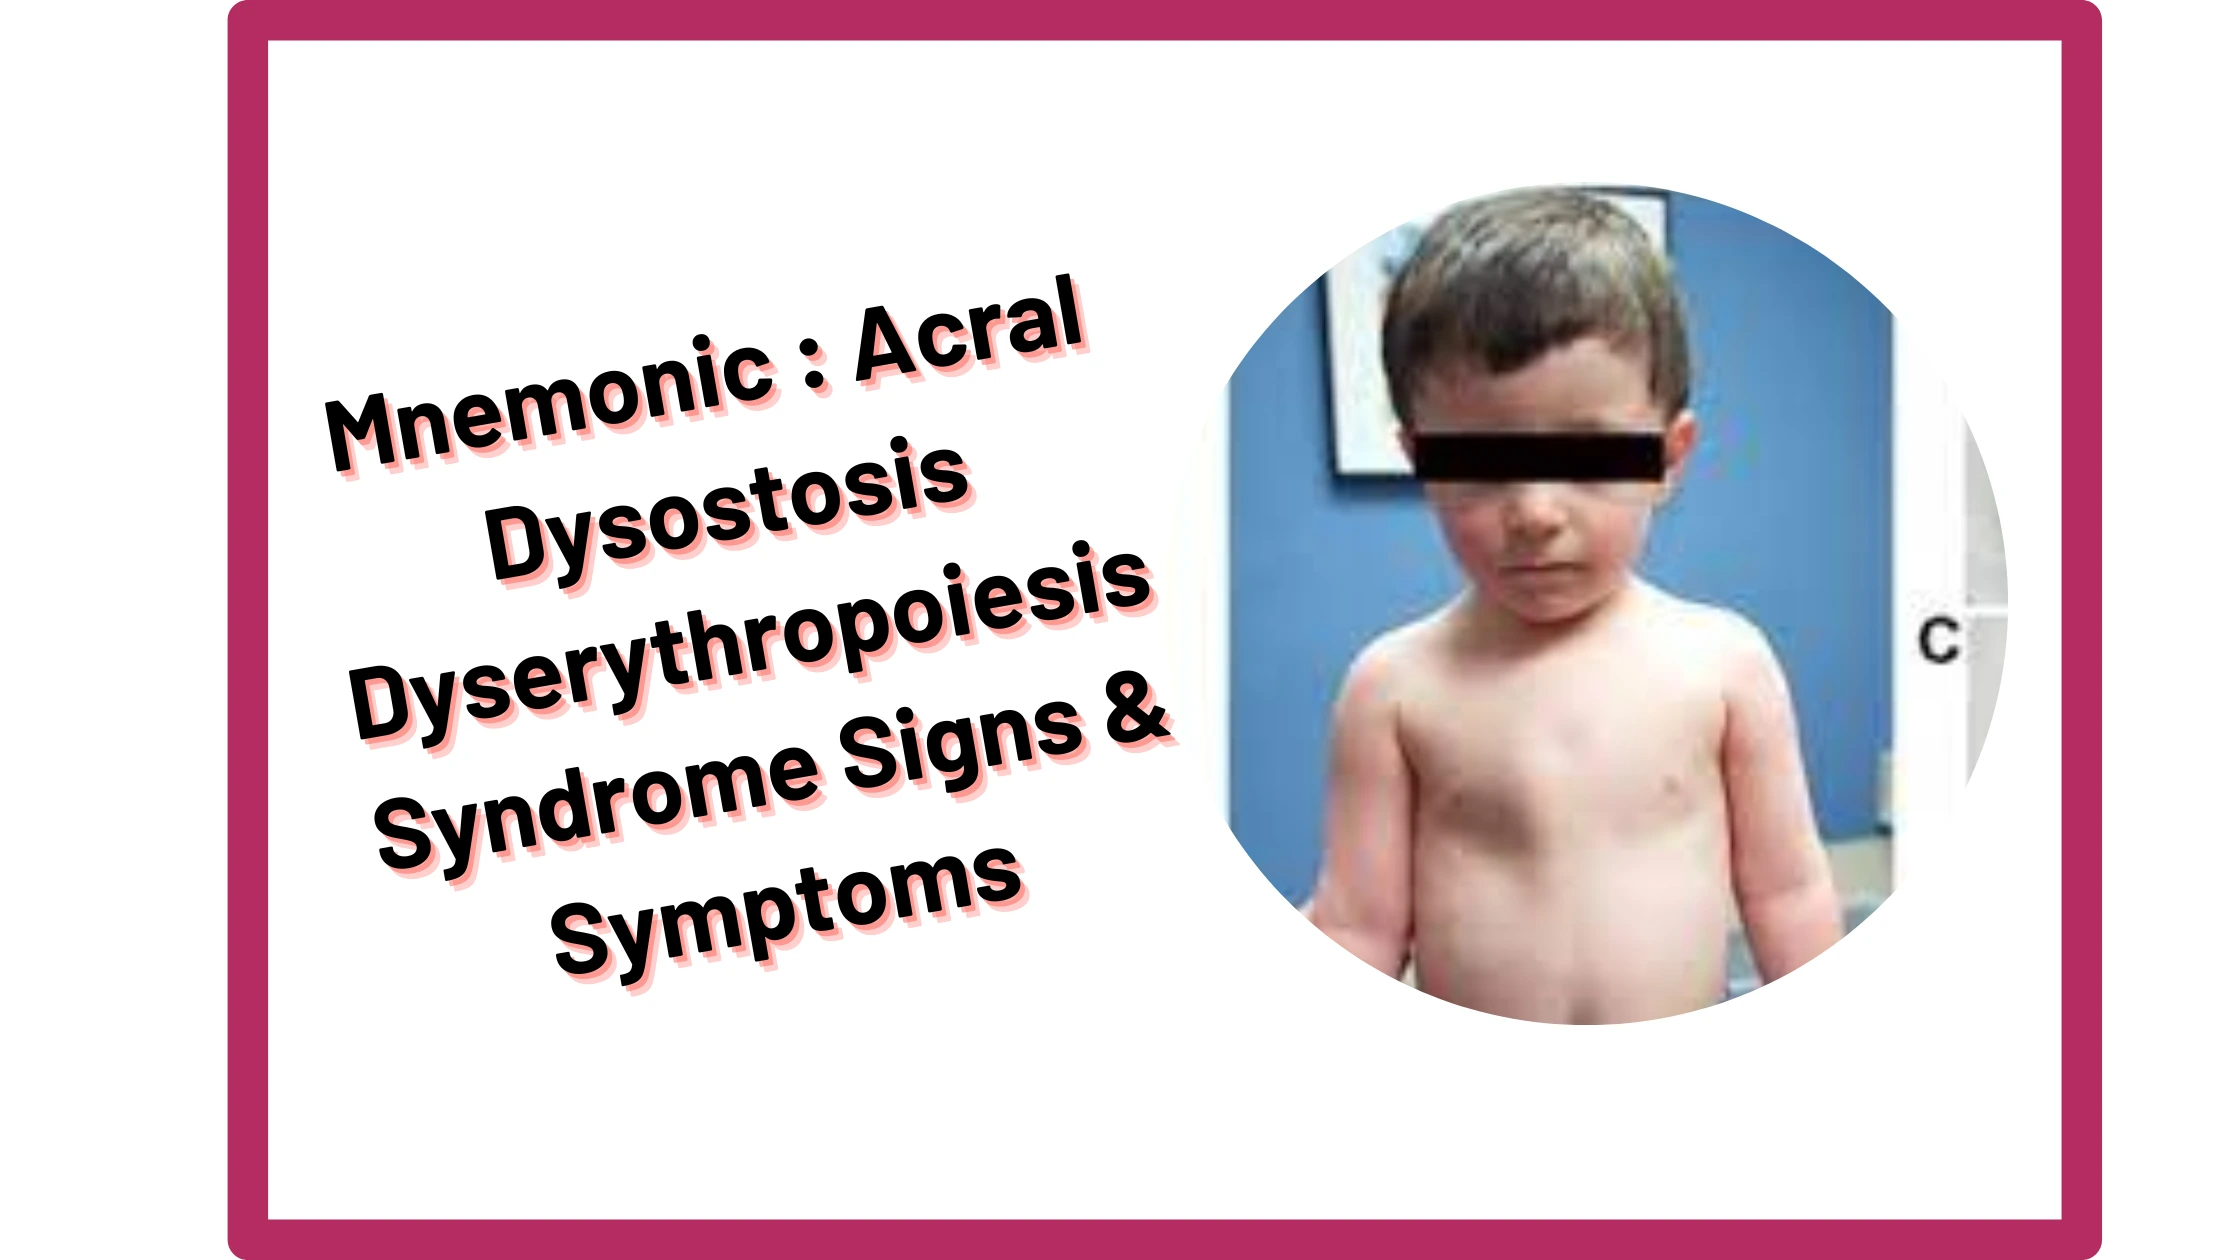 You are currently viewing [Very Cool] Mnemonic : Acral Dysostosis Dyserythropoiesis Syndrome Signs & Symptoms